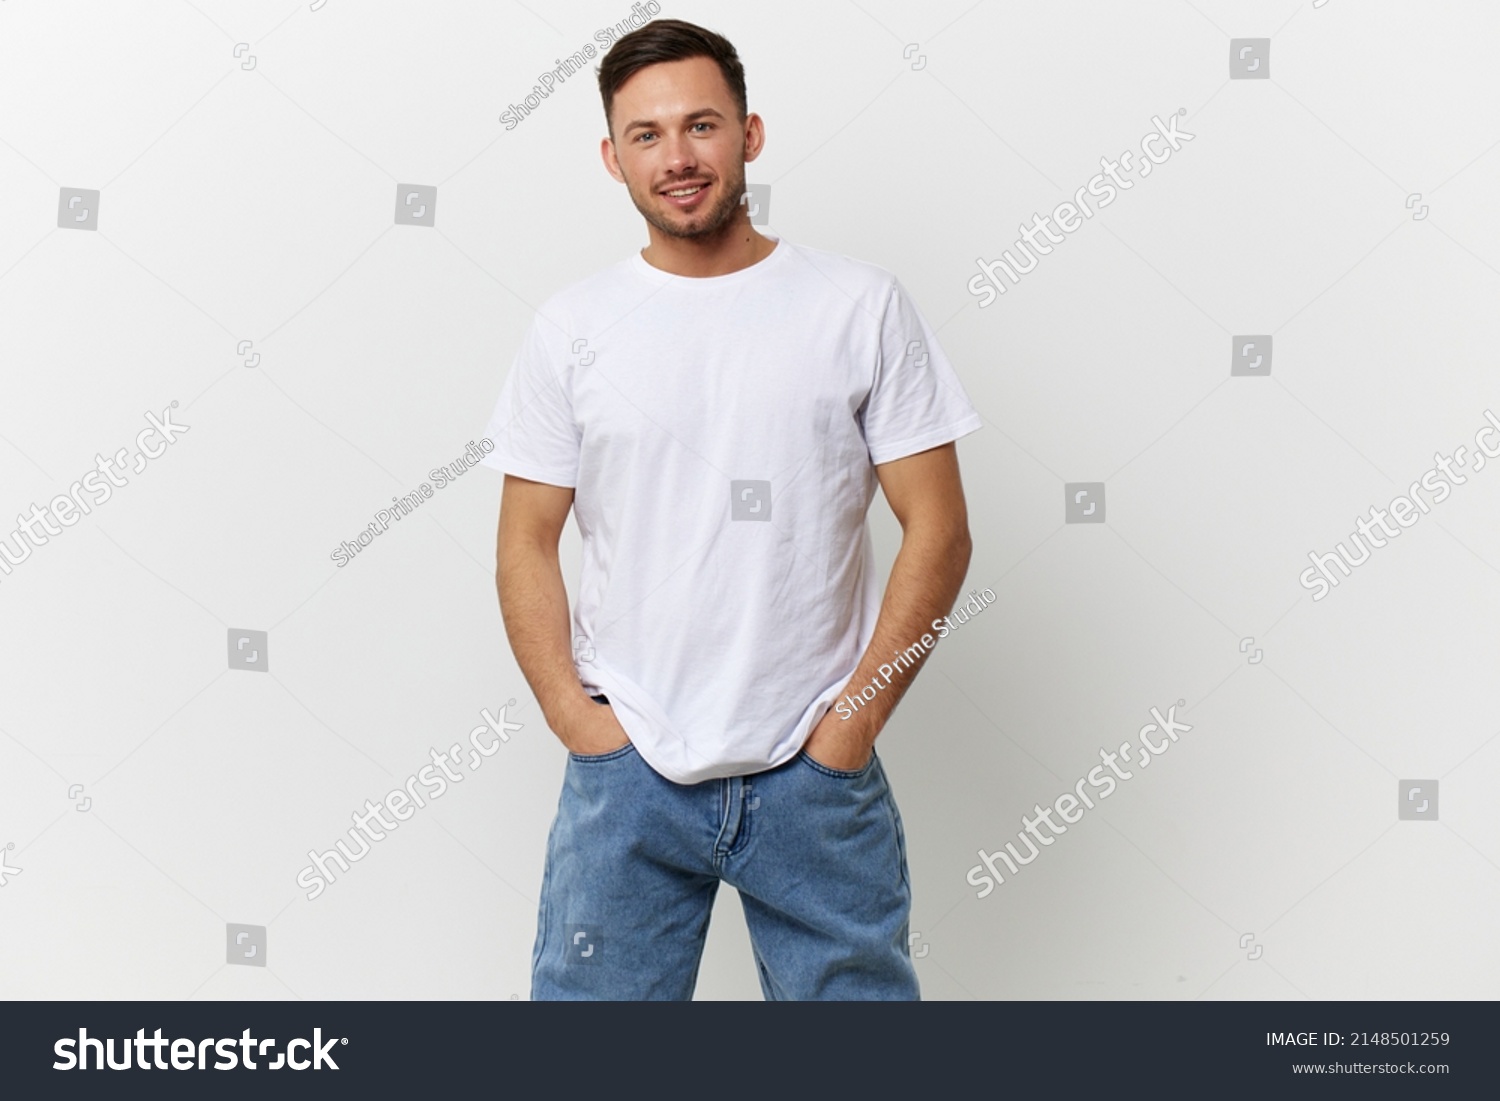 Happy cheerful tanned handsome man in basic t-shirt smile at camera posing isolated on over white studio background. Copy space Banner Mockup. People emotions Lifestyle concept. Model snapshots #2148501259